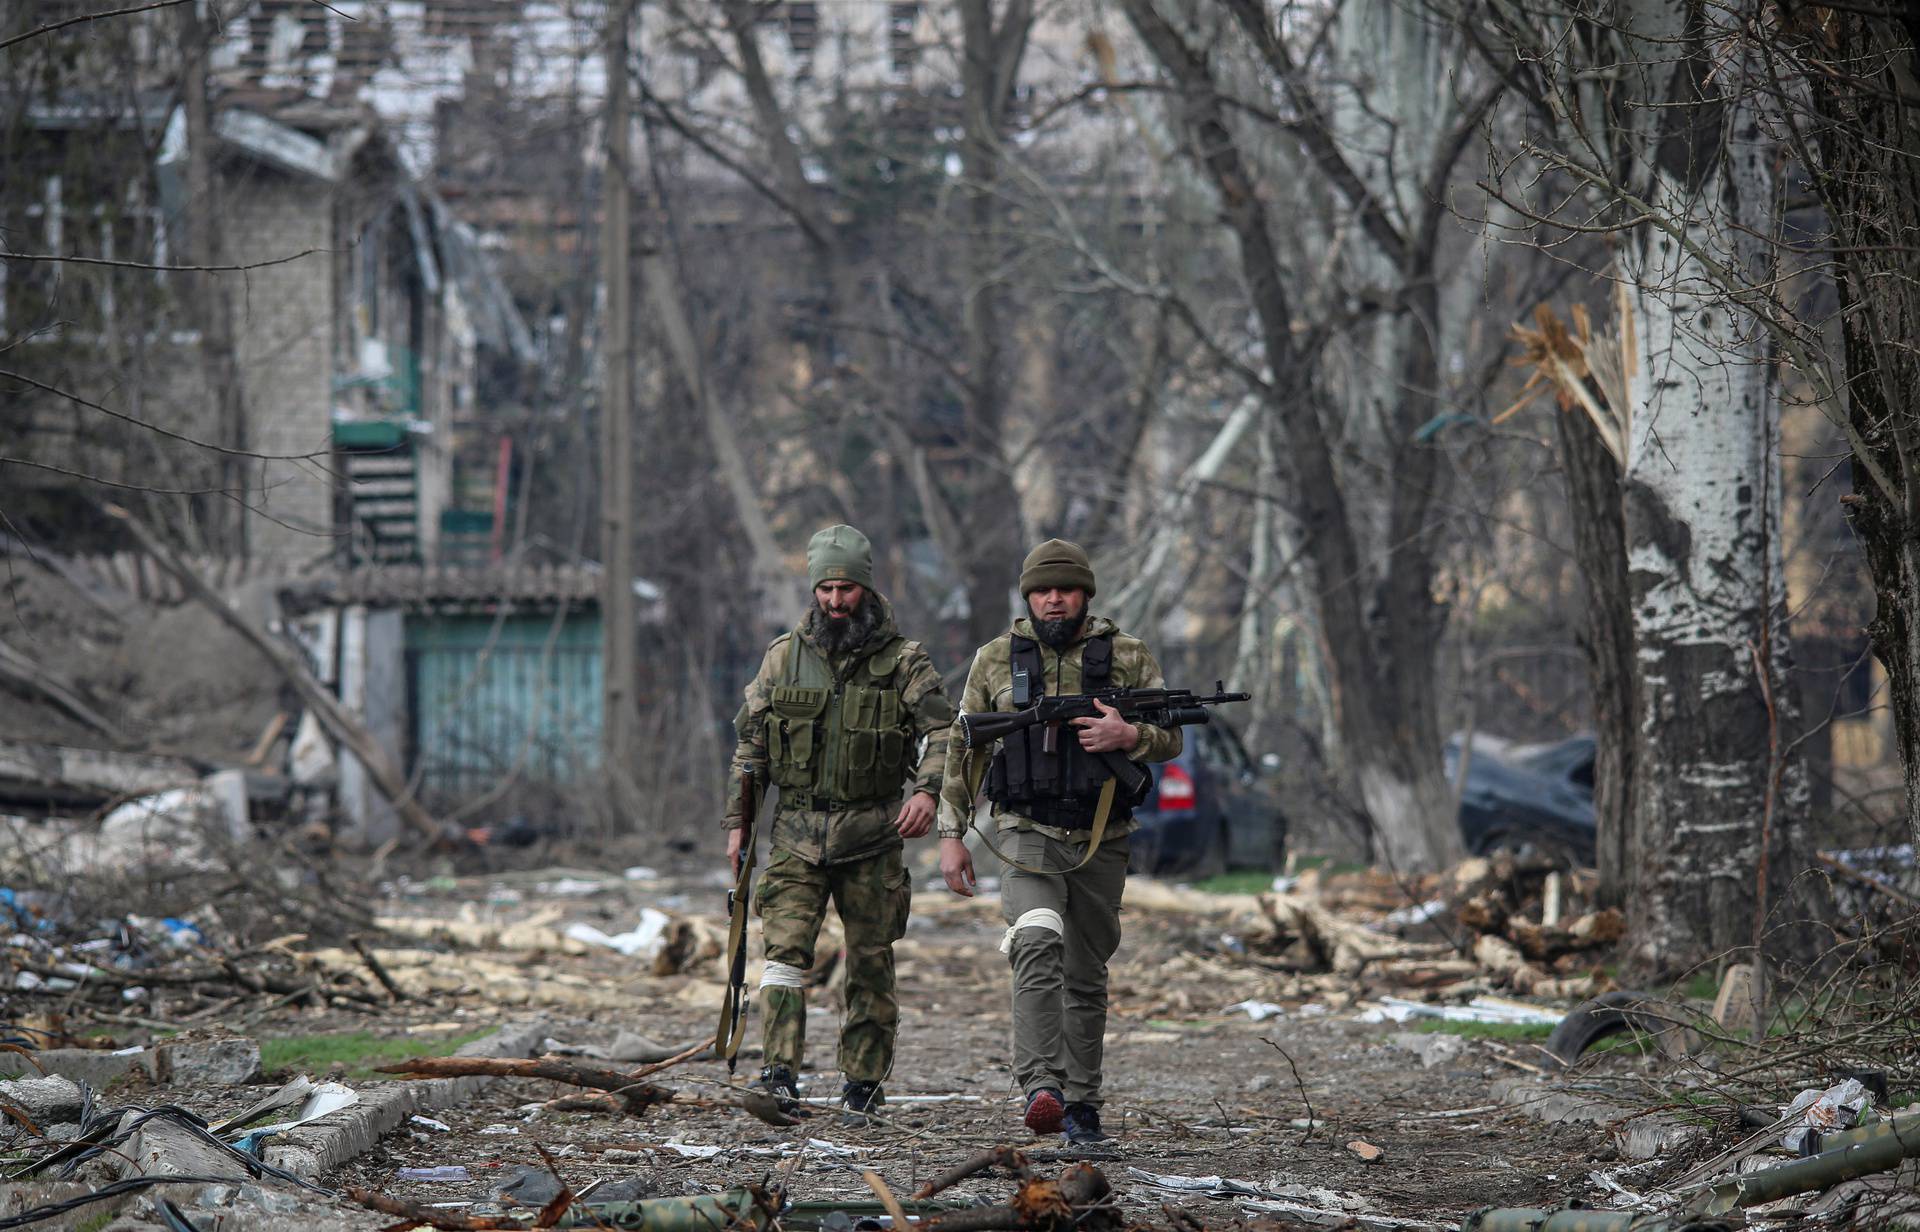 Service members from Chechen Republic walk during fighting in Ukraine-Russia conflict in Mariupol